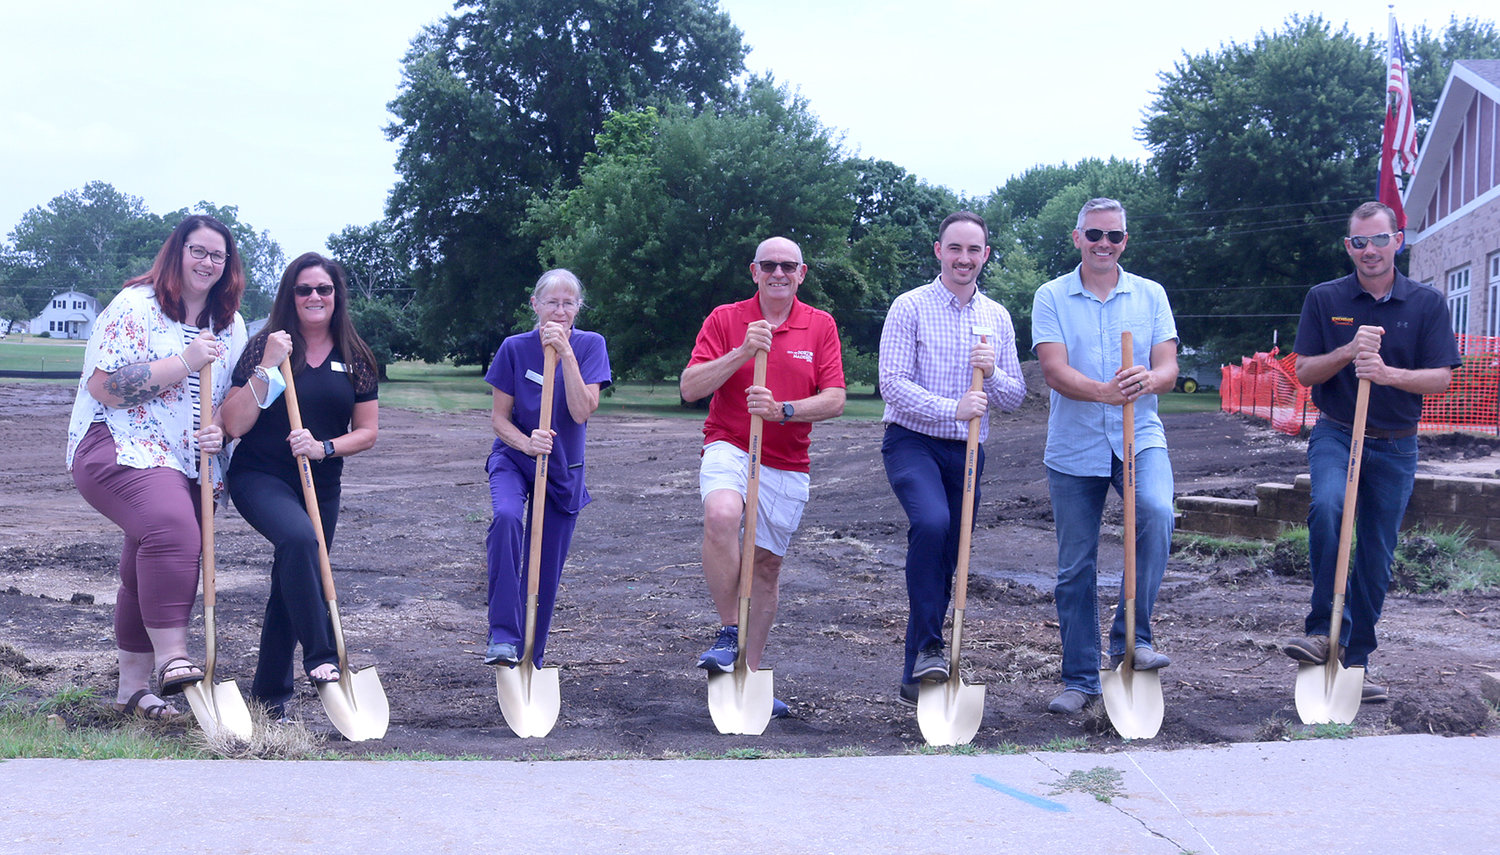 Dignitaries including Fort Madison Mayor Matt Mohrfeld, center, and The Madison staff, along with owner Mark Holtkamp and Construction Manager Mark Schickedanz break ground at The Madison's expansion project in Fort Madison Wednesday afternoon.